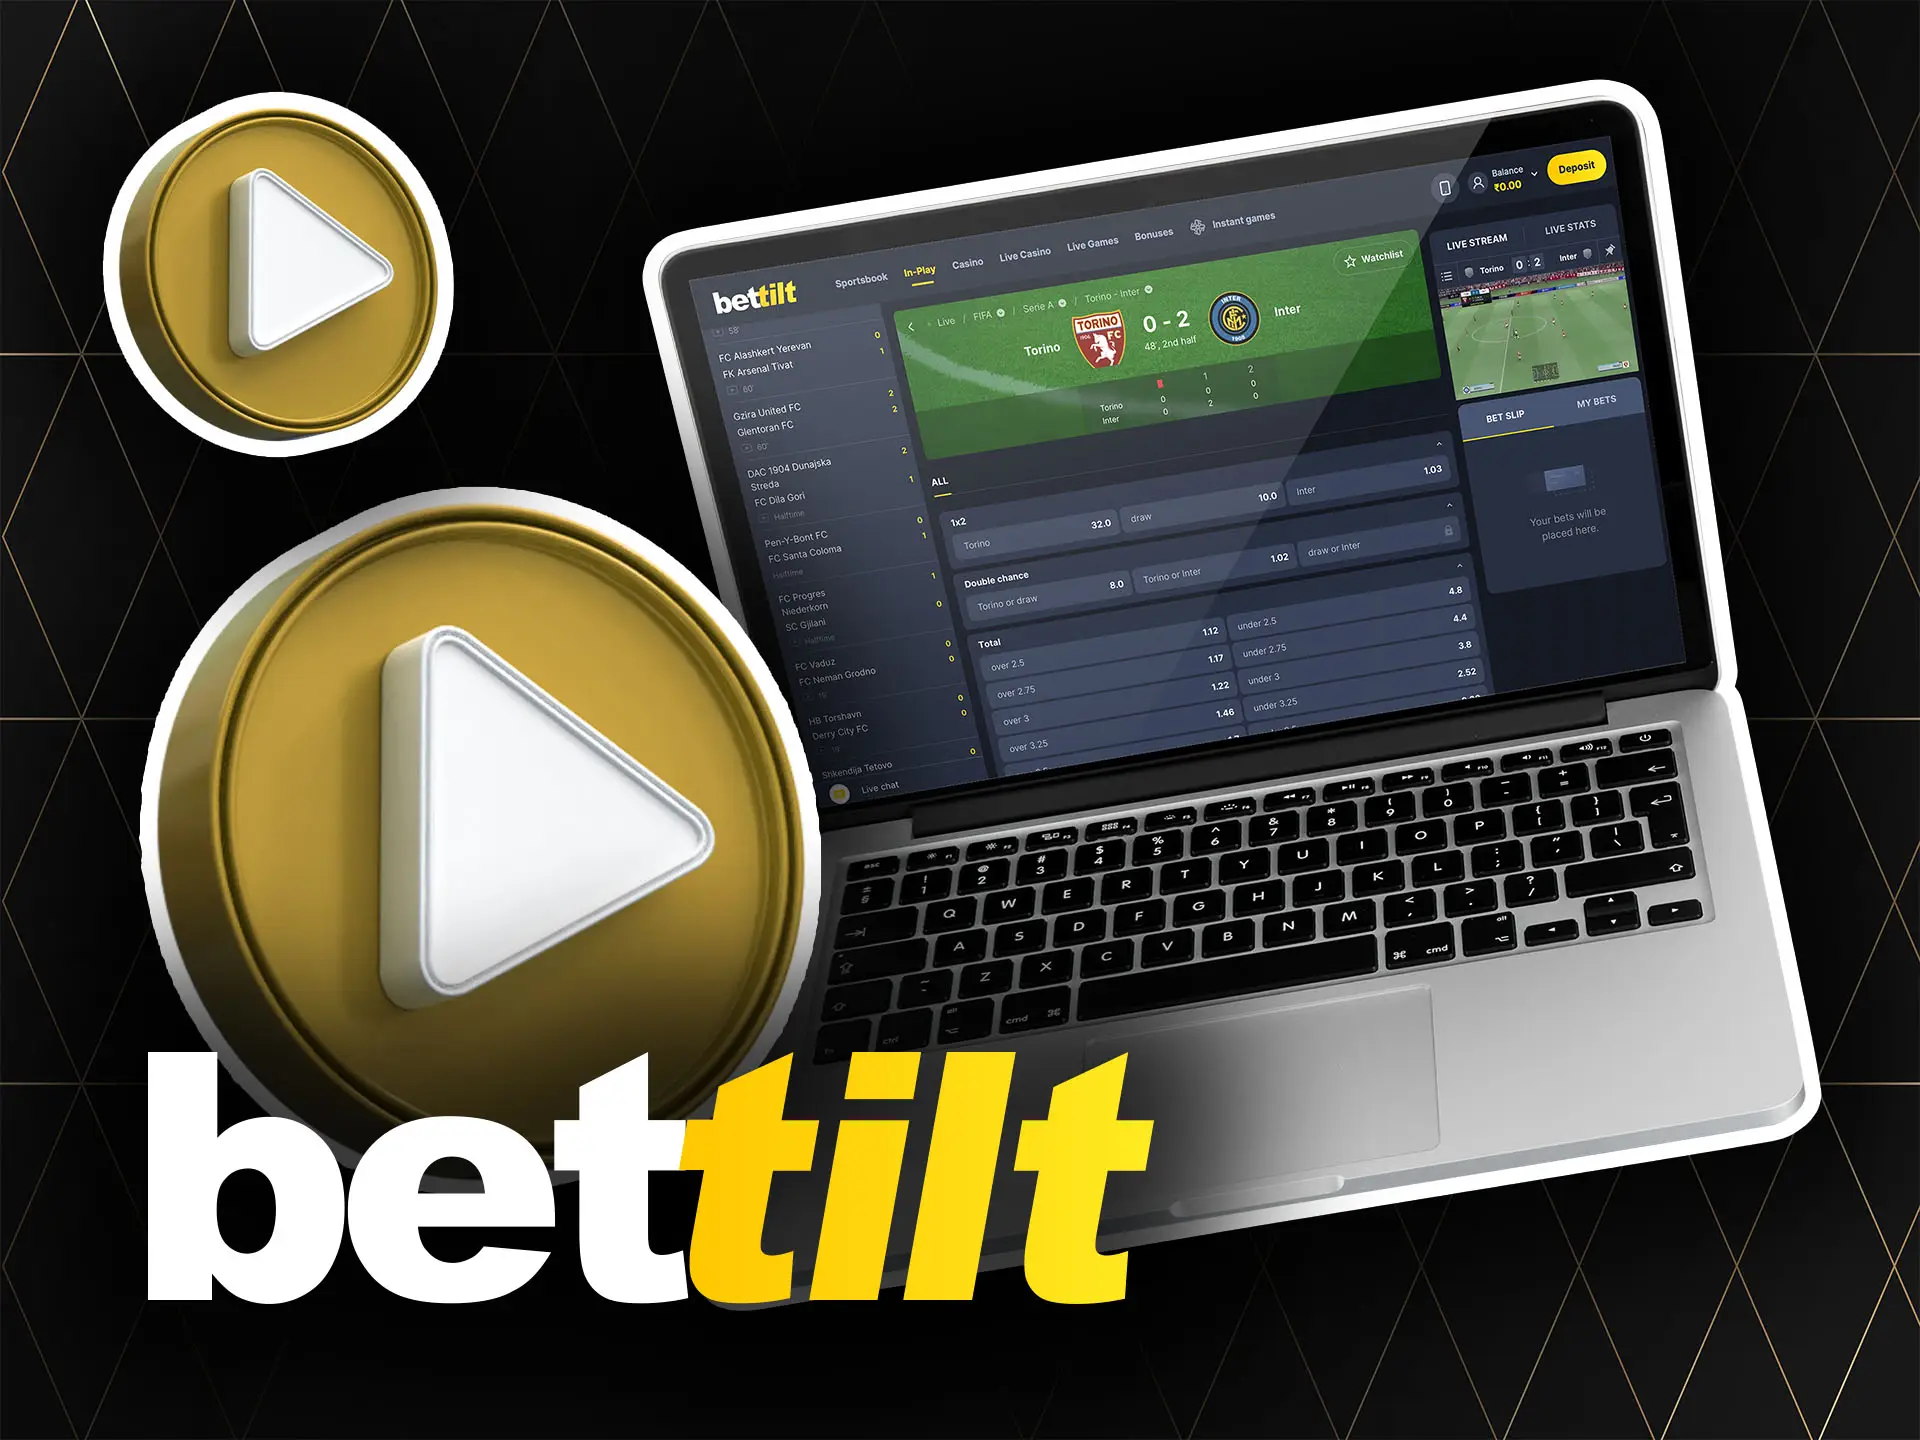 Plec bets during the match in the Bettilt live betting section.